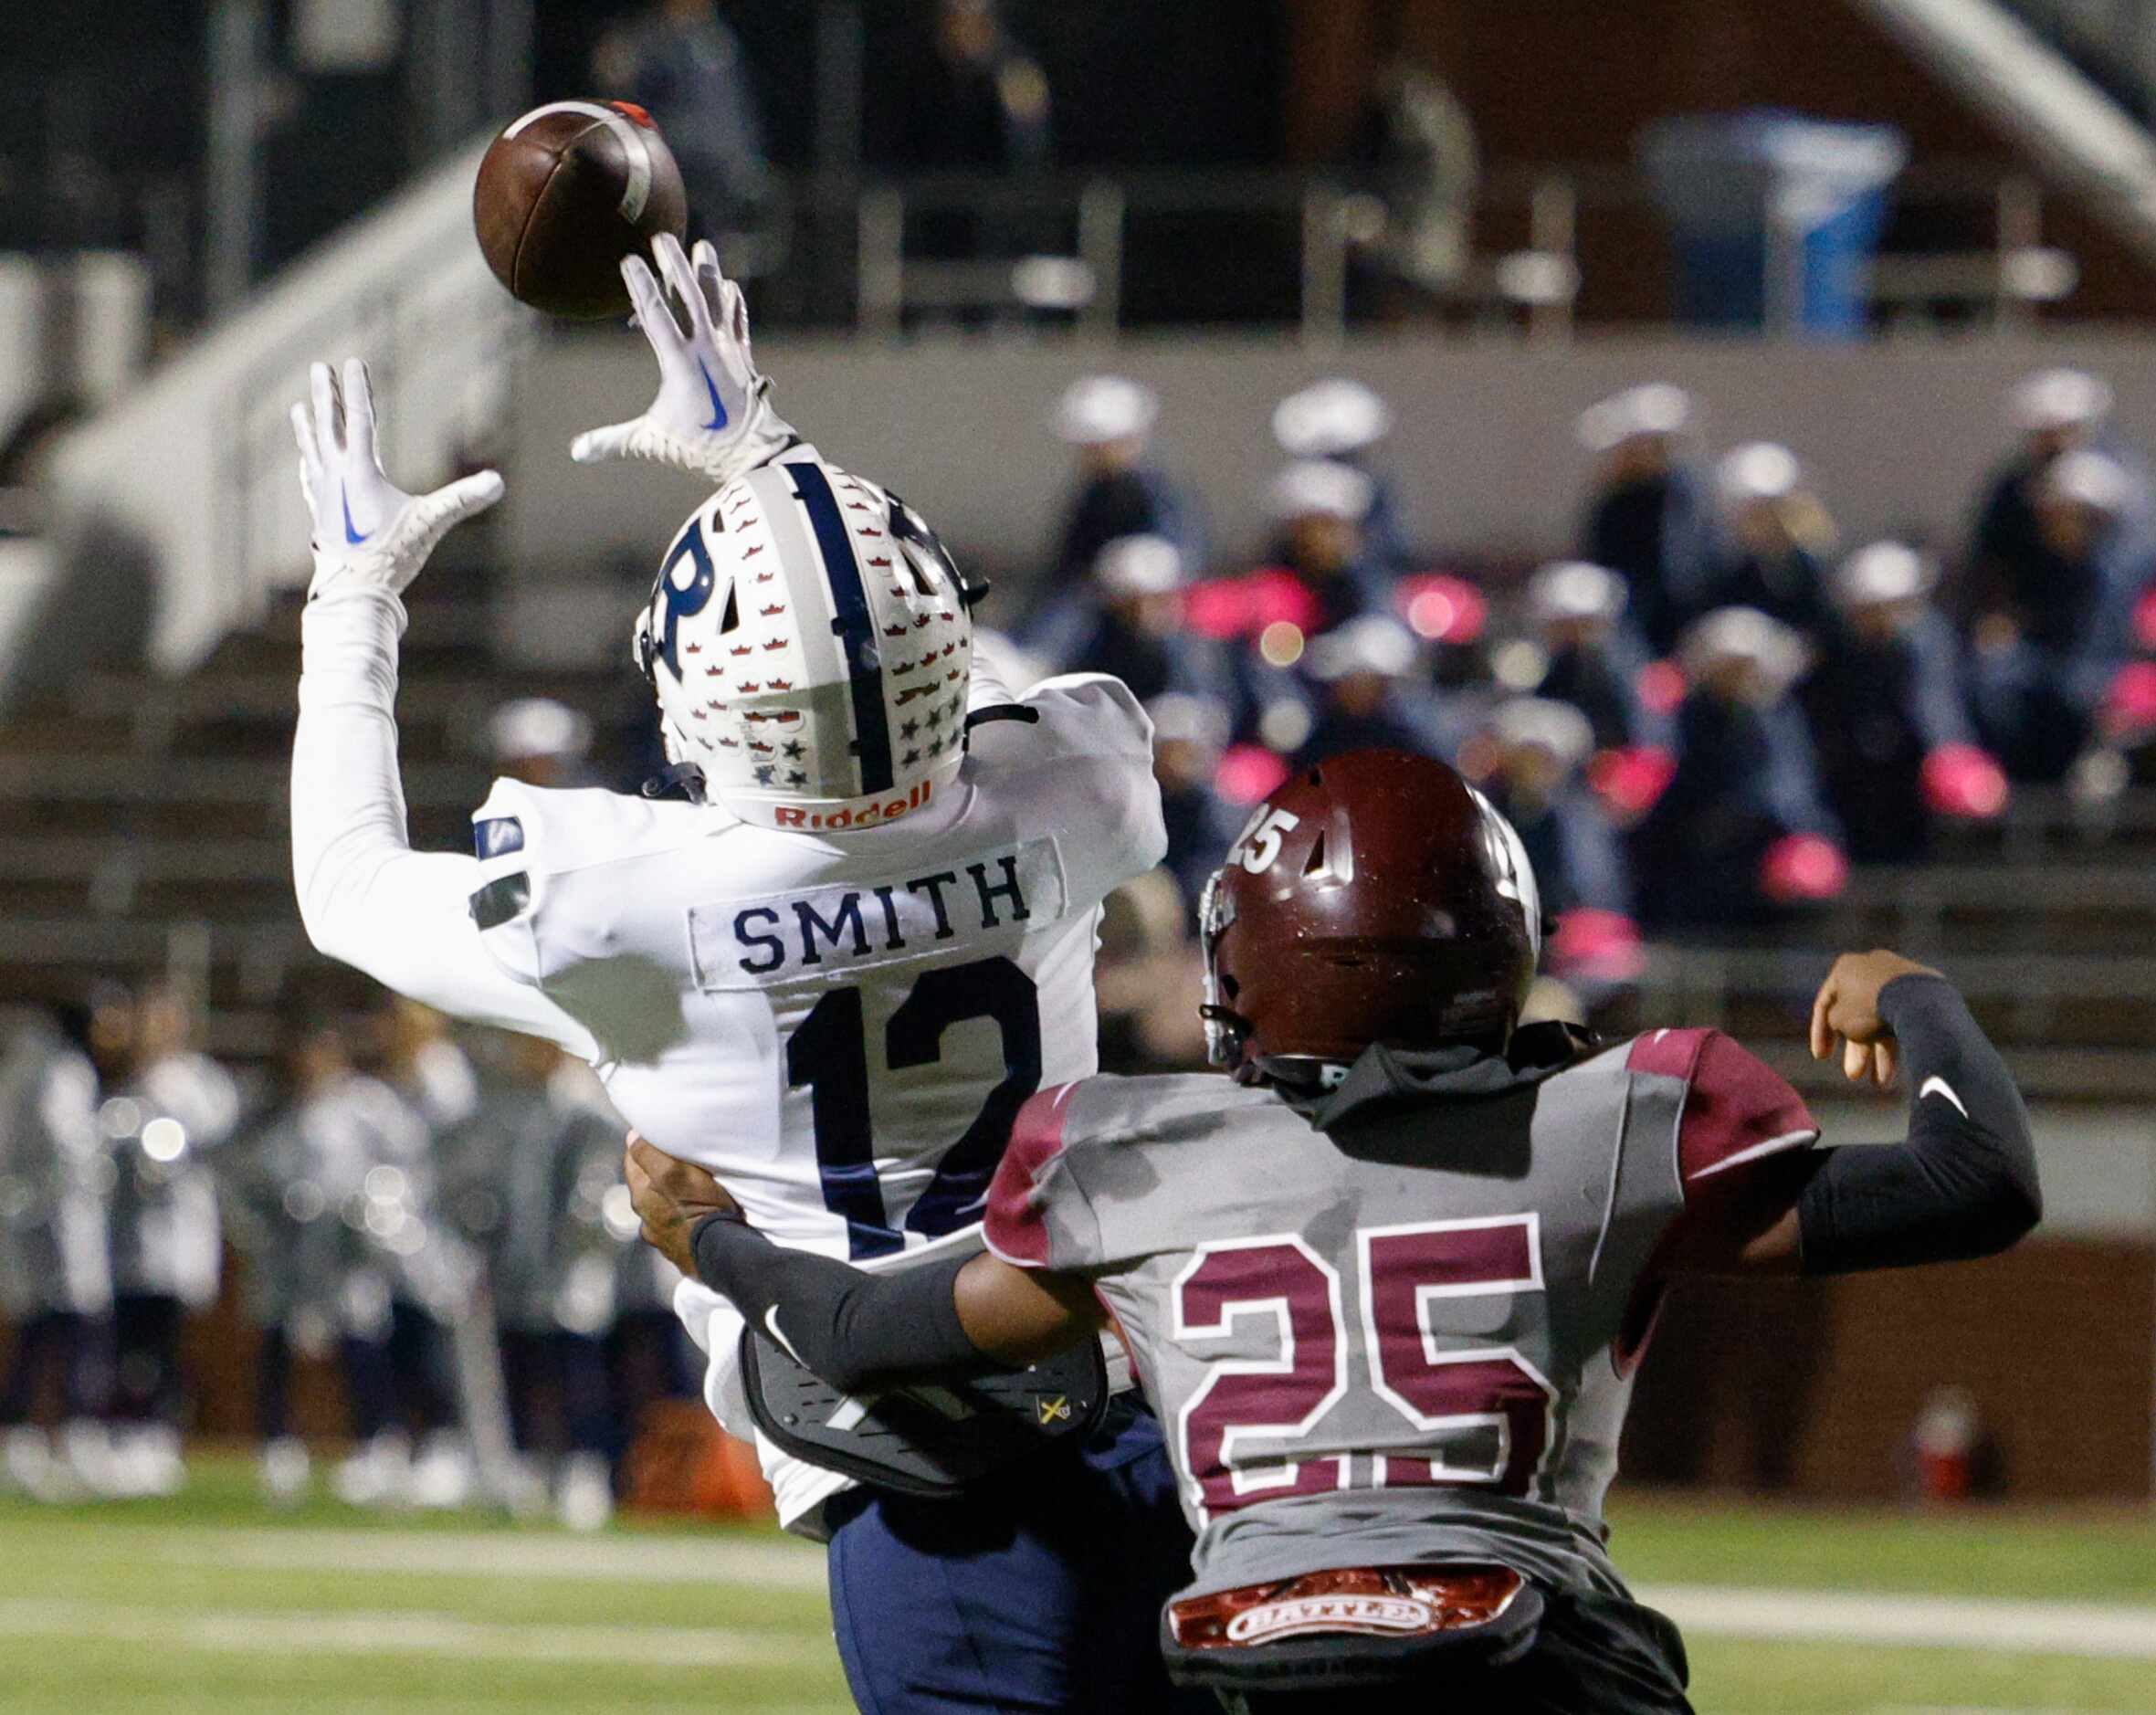 Richland wide receiver Evan Smith (12) makes a catch over Mansfield Timberview defensive...